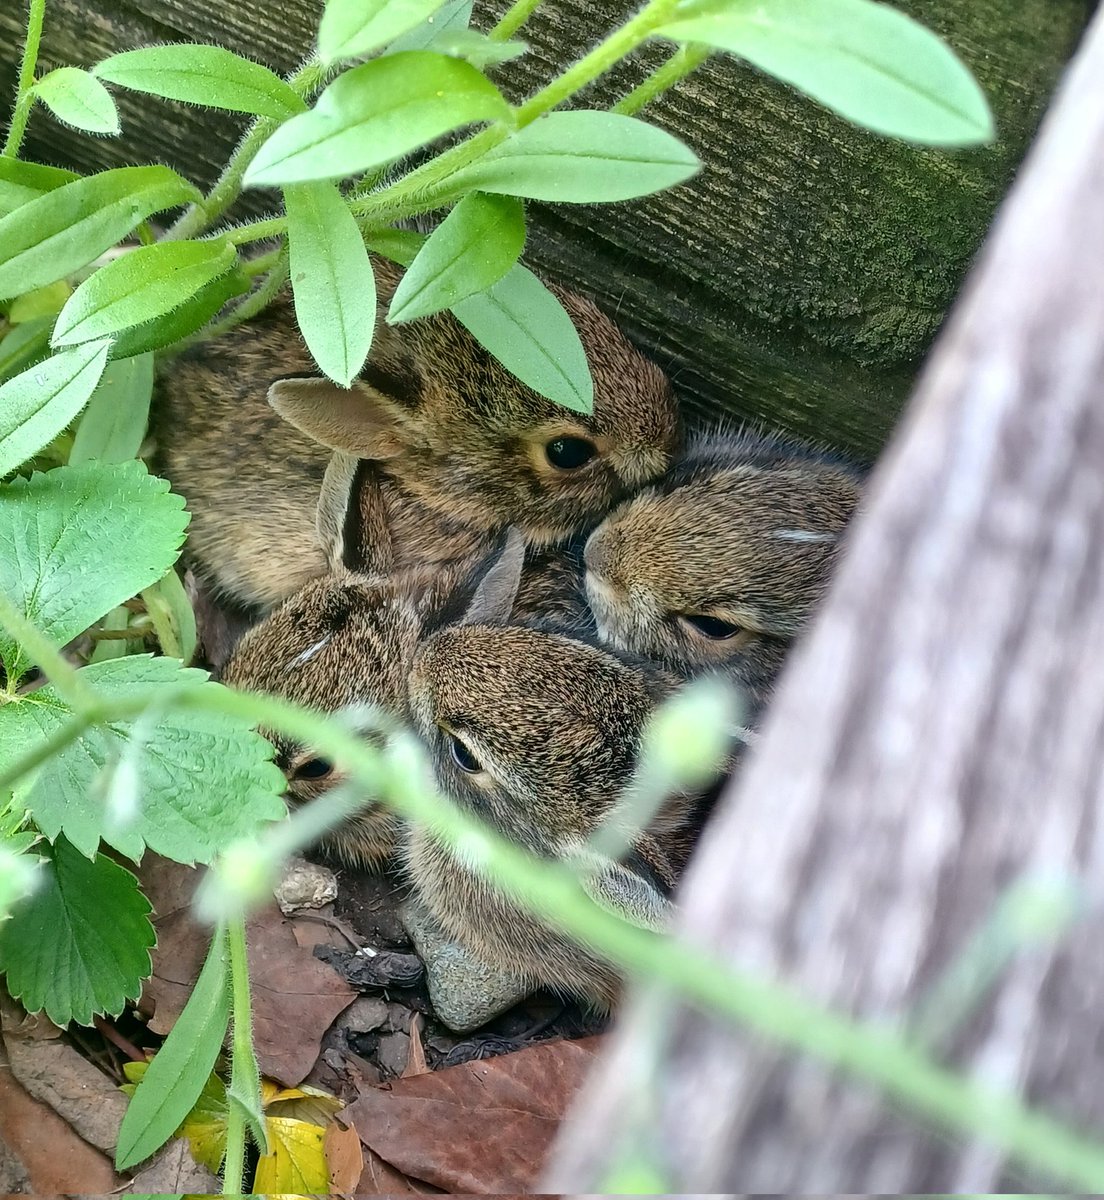 Found some tiny guests in my strawberry bed 🐇 Now I have a great excuse for not weeding 😆